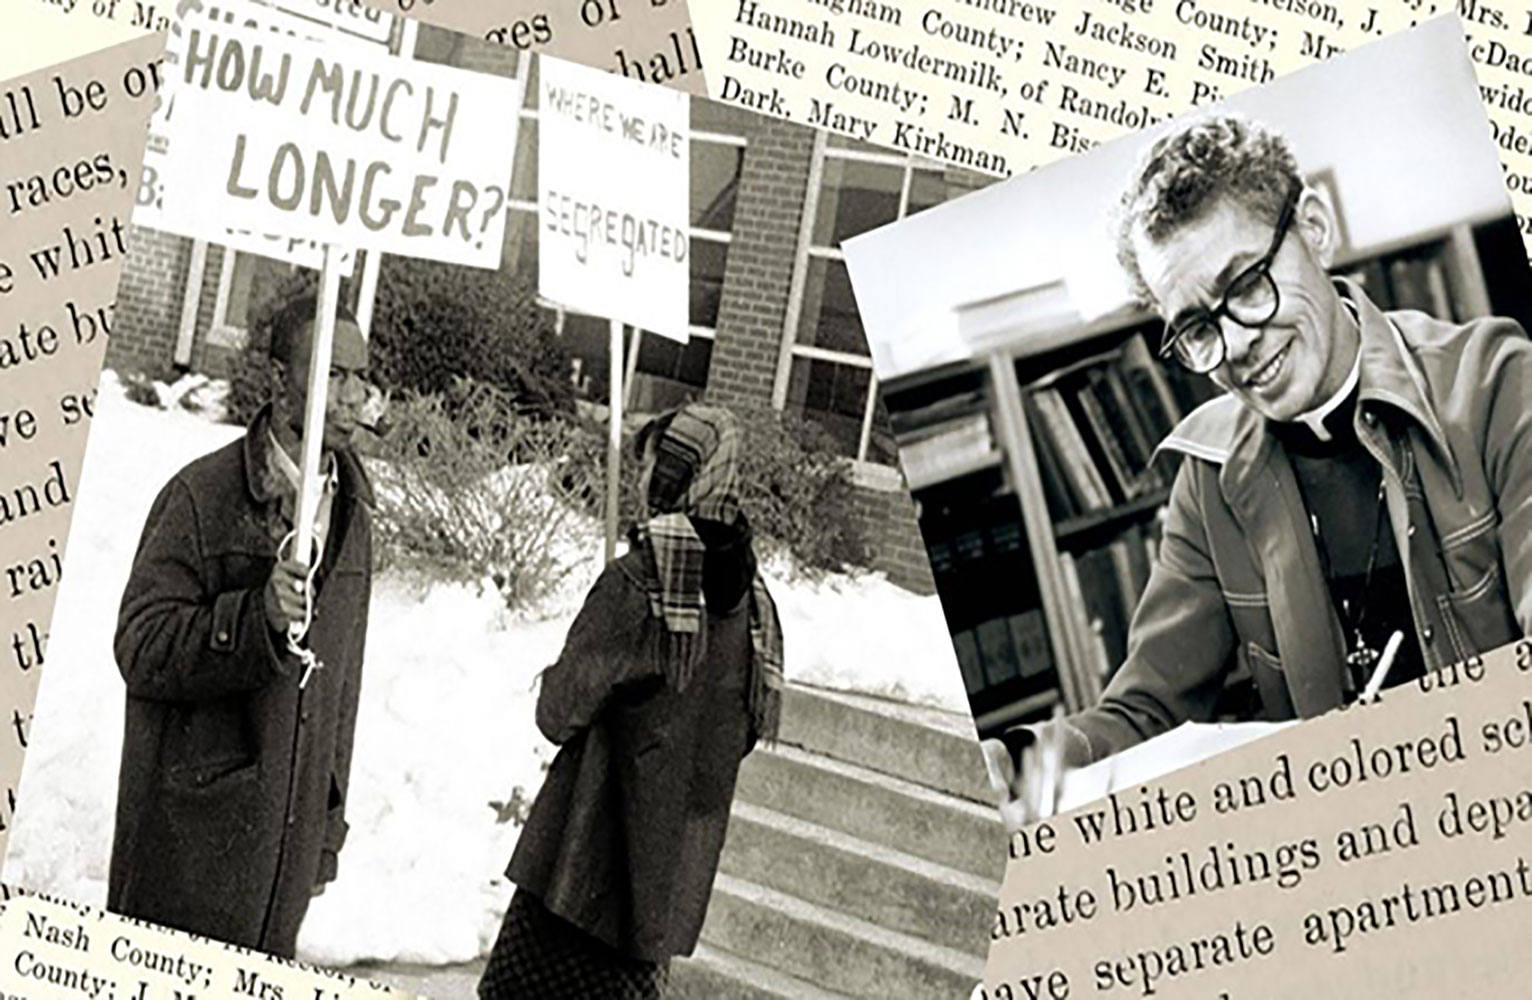 Black and white images of people holding signs for protests and of a priest sitting in a library